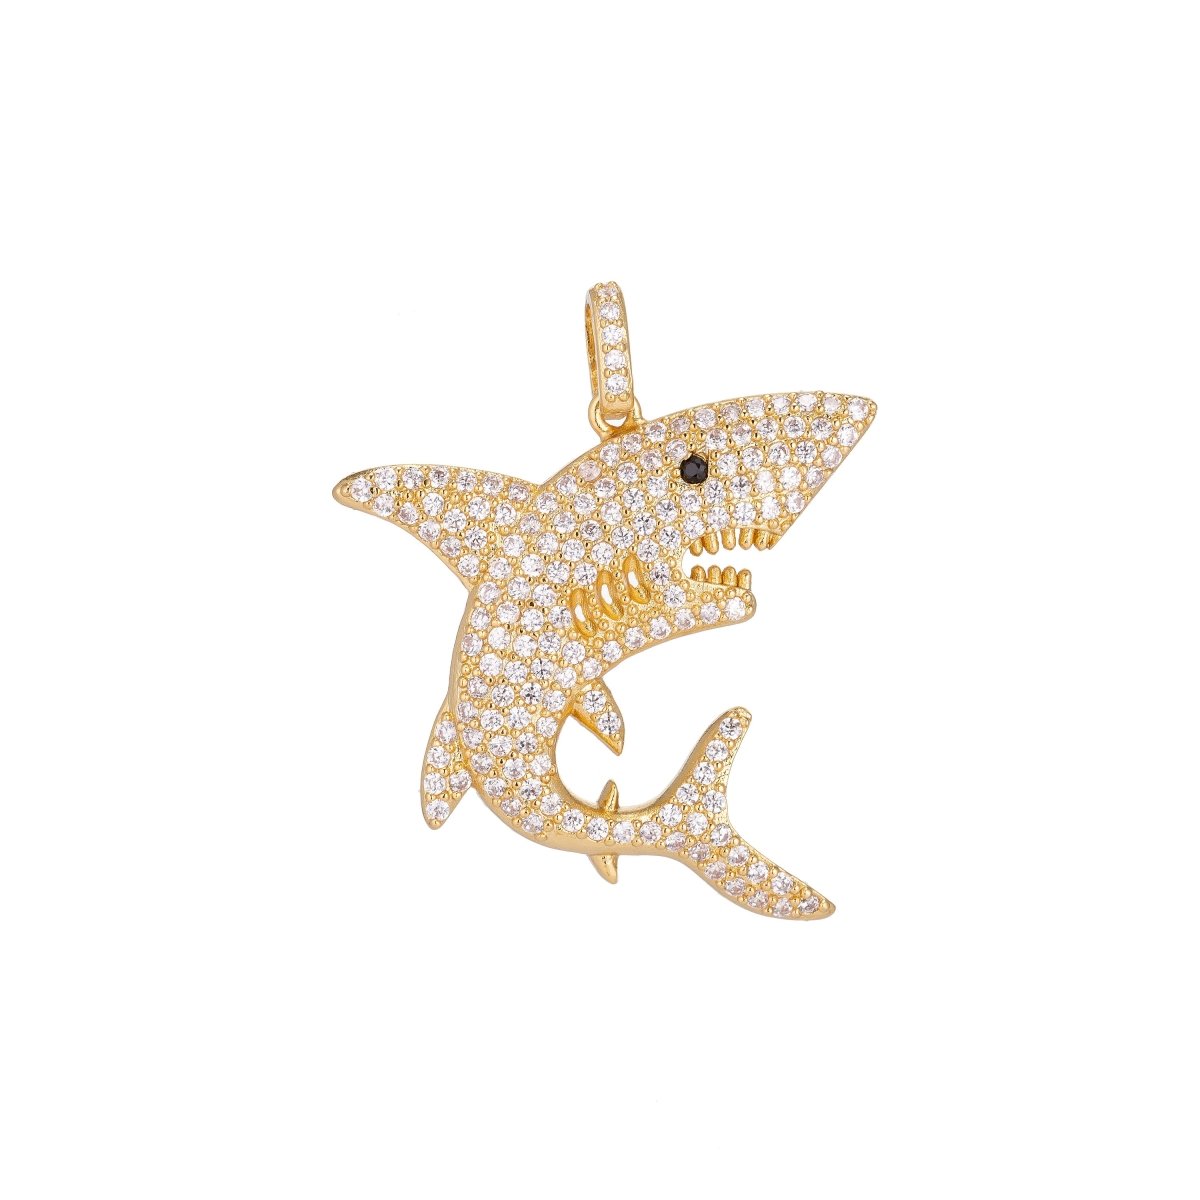 18K Gold Filled Baby Shark Charm Pendant w/ Cubic Zirconia for Layer Necklace Bracelet Earing Jewelry Making Supplies C-076 - DLUXCA